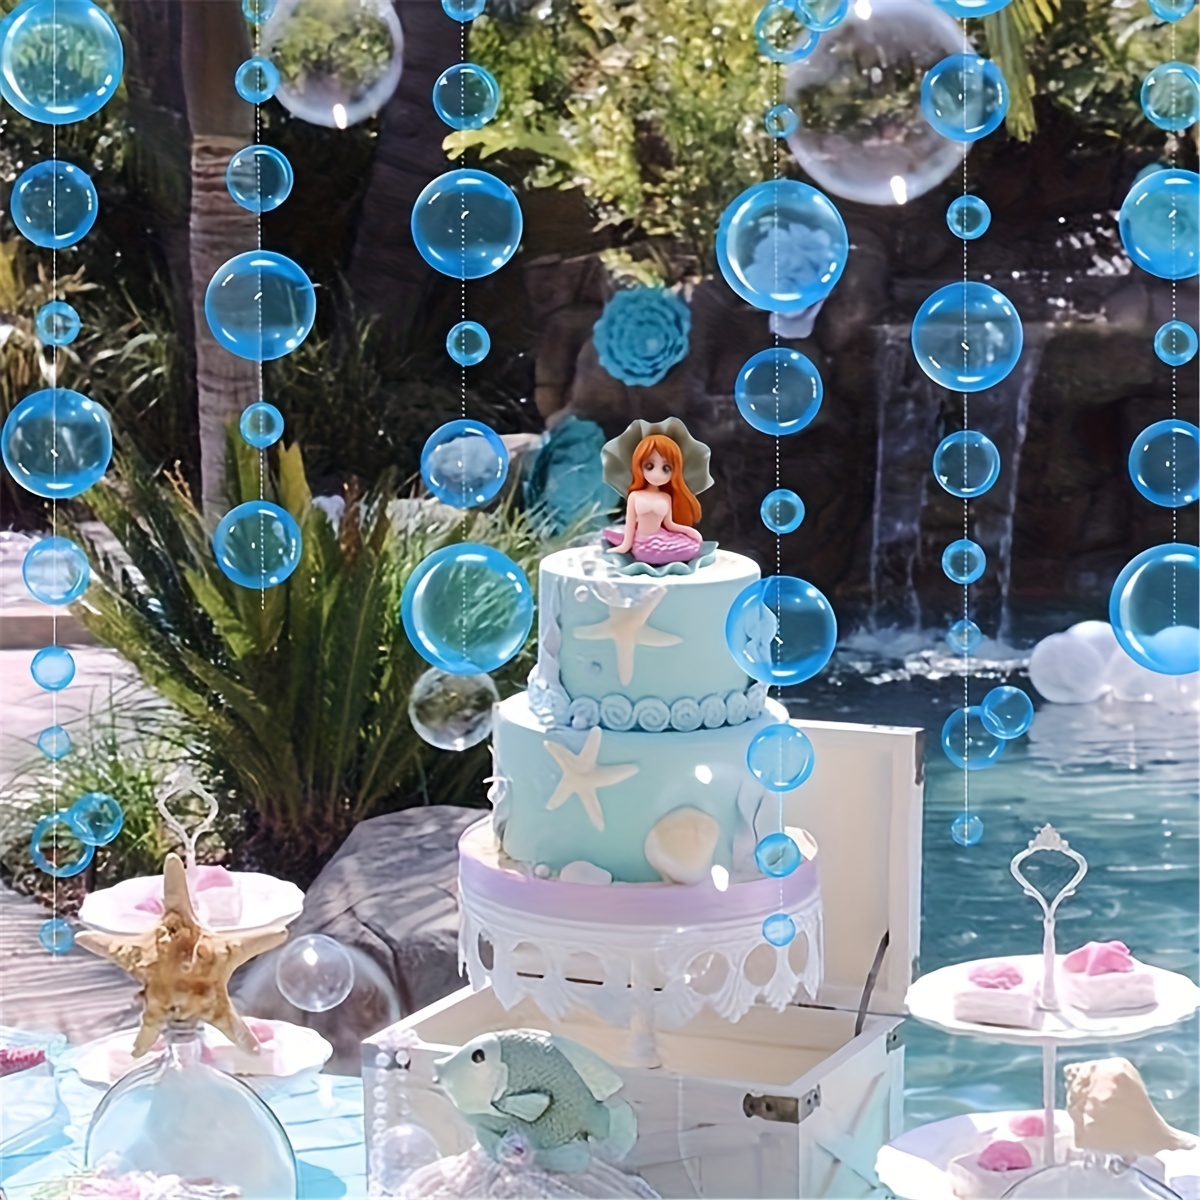 Flat Seabed White Bubble Garland Is Suitable for Little Mermaid Party Decoration. Transparent Floating Hanging Bubbles, Size: Large